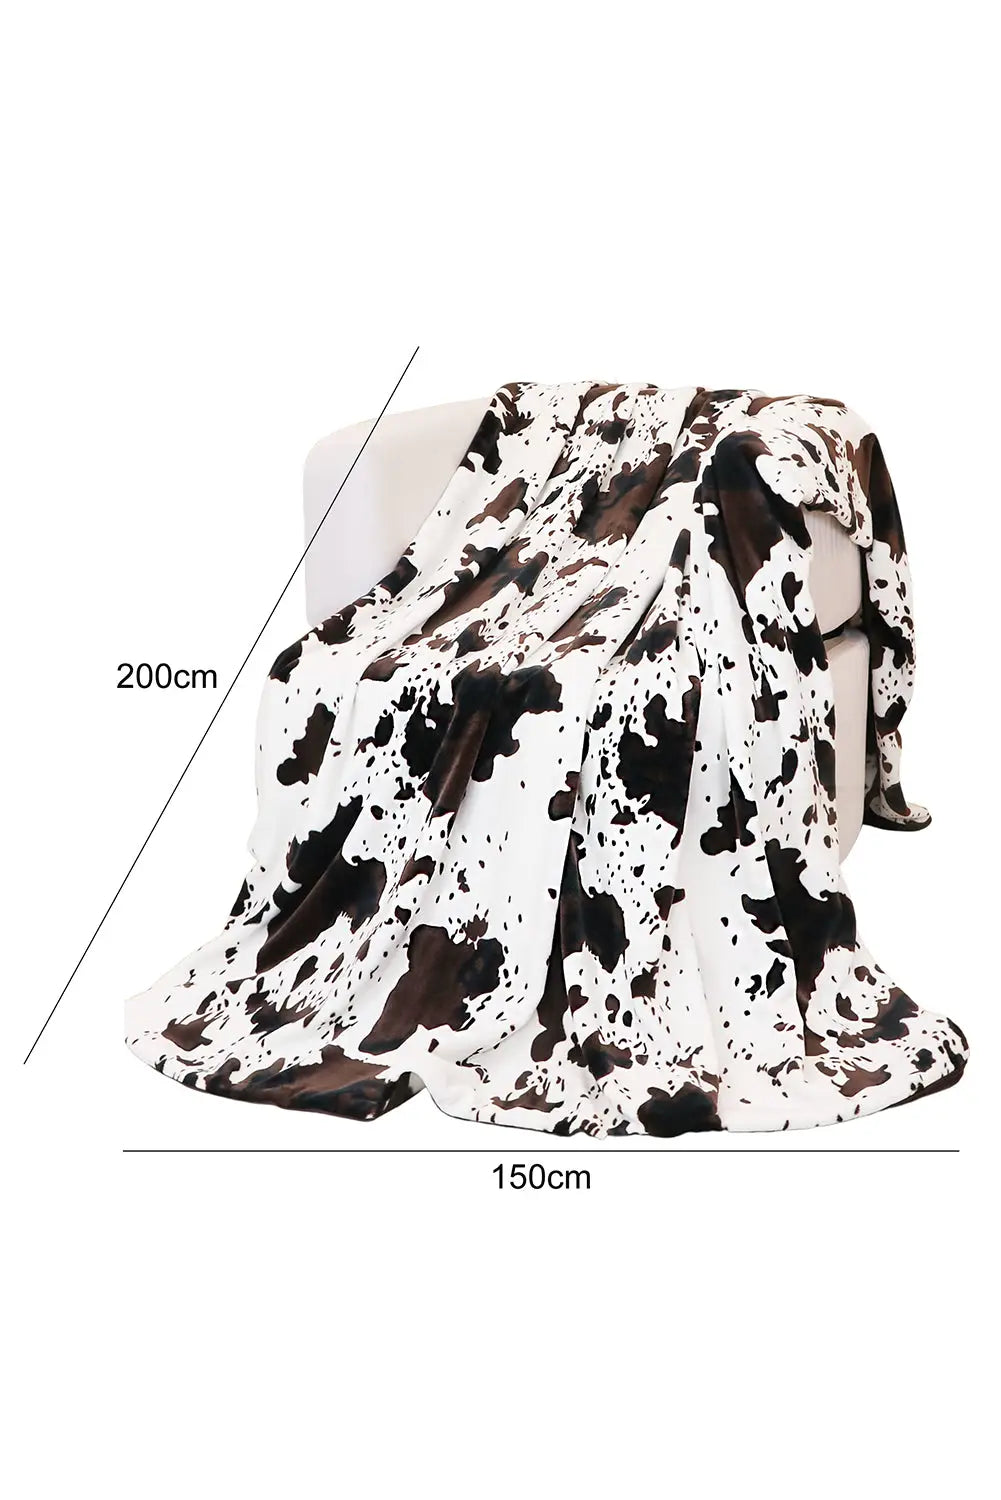 Multicolour cow spots plush blanket 150*200cm - one size / 100% polyester - blankets